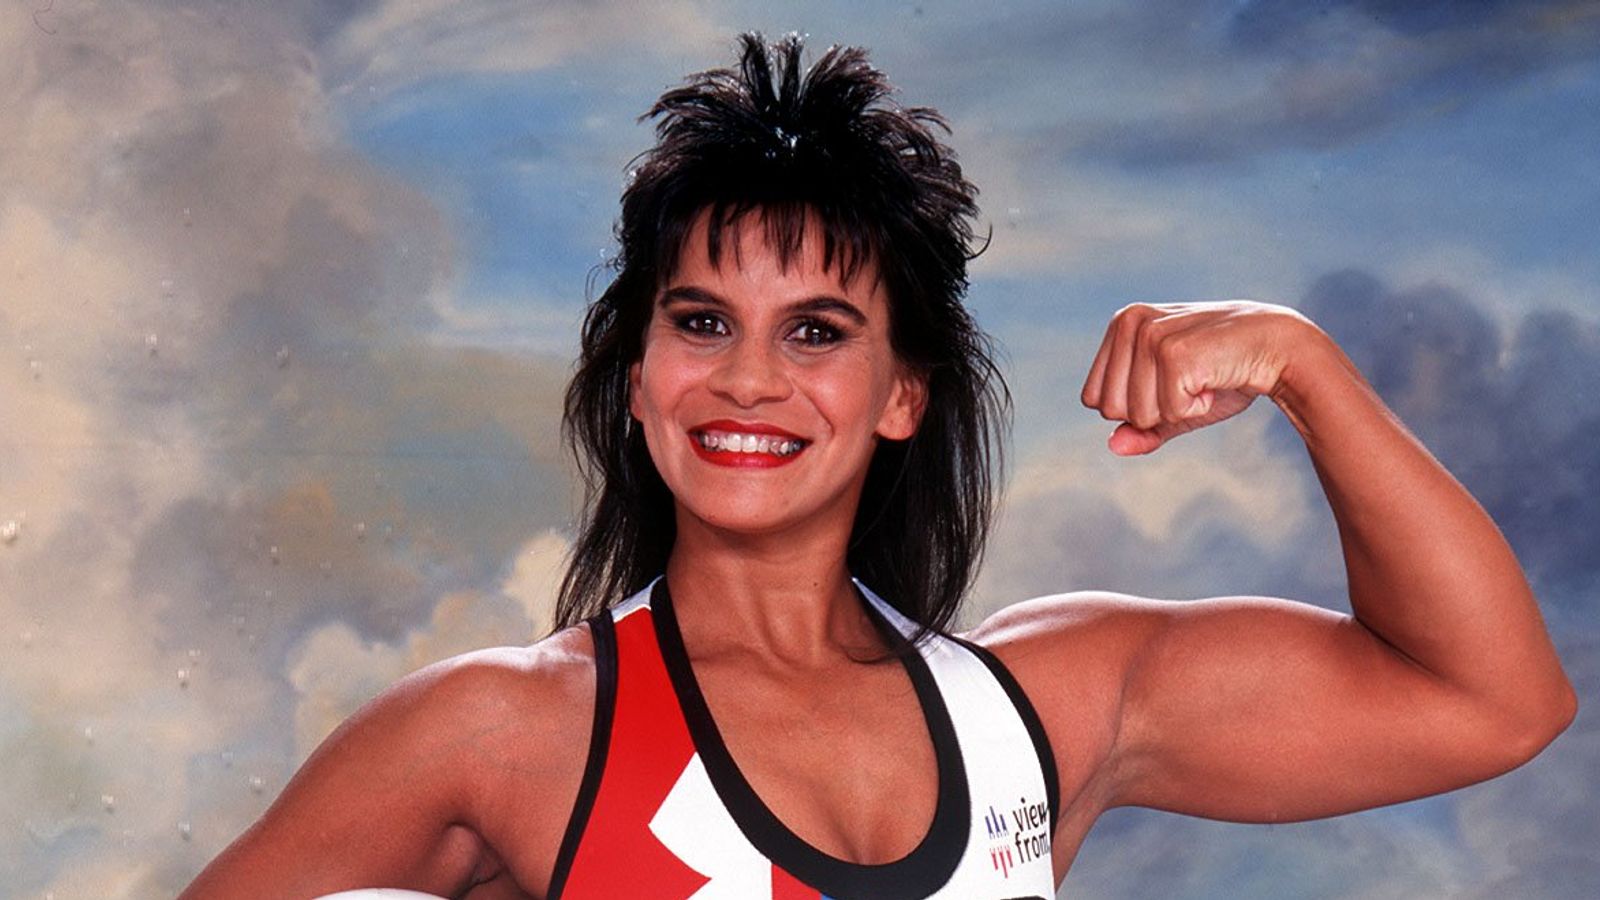 Gladiators star Falcon dies aged 59: Tributes paid to 'most lovely' ballerina-turned-bodybuilder